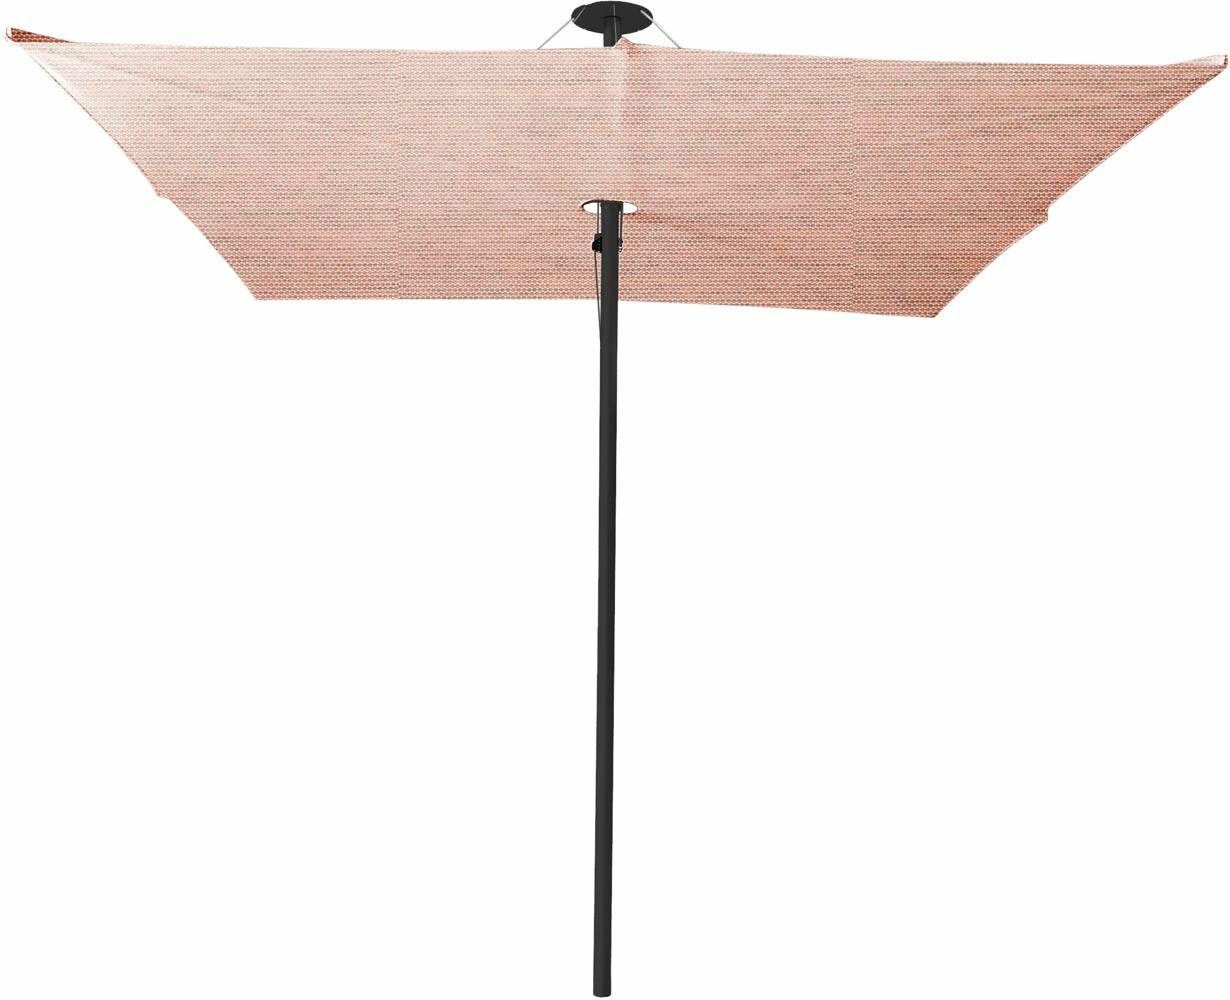 Infina center post umbrella, 3 m square, with frame in Black and Colorum Blush canopy.